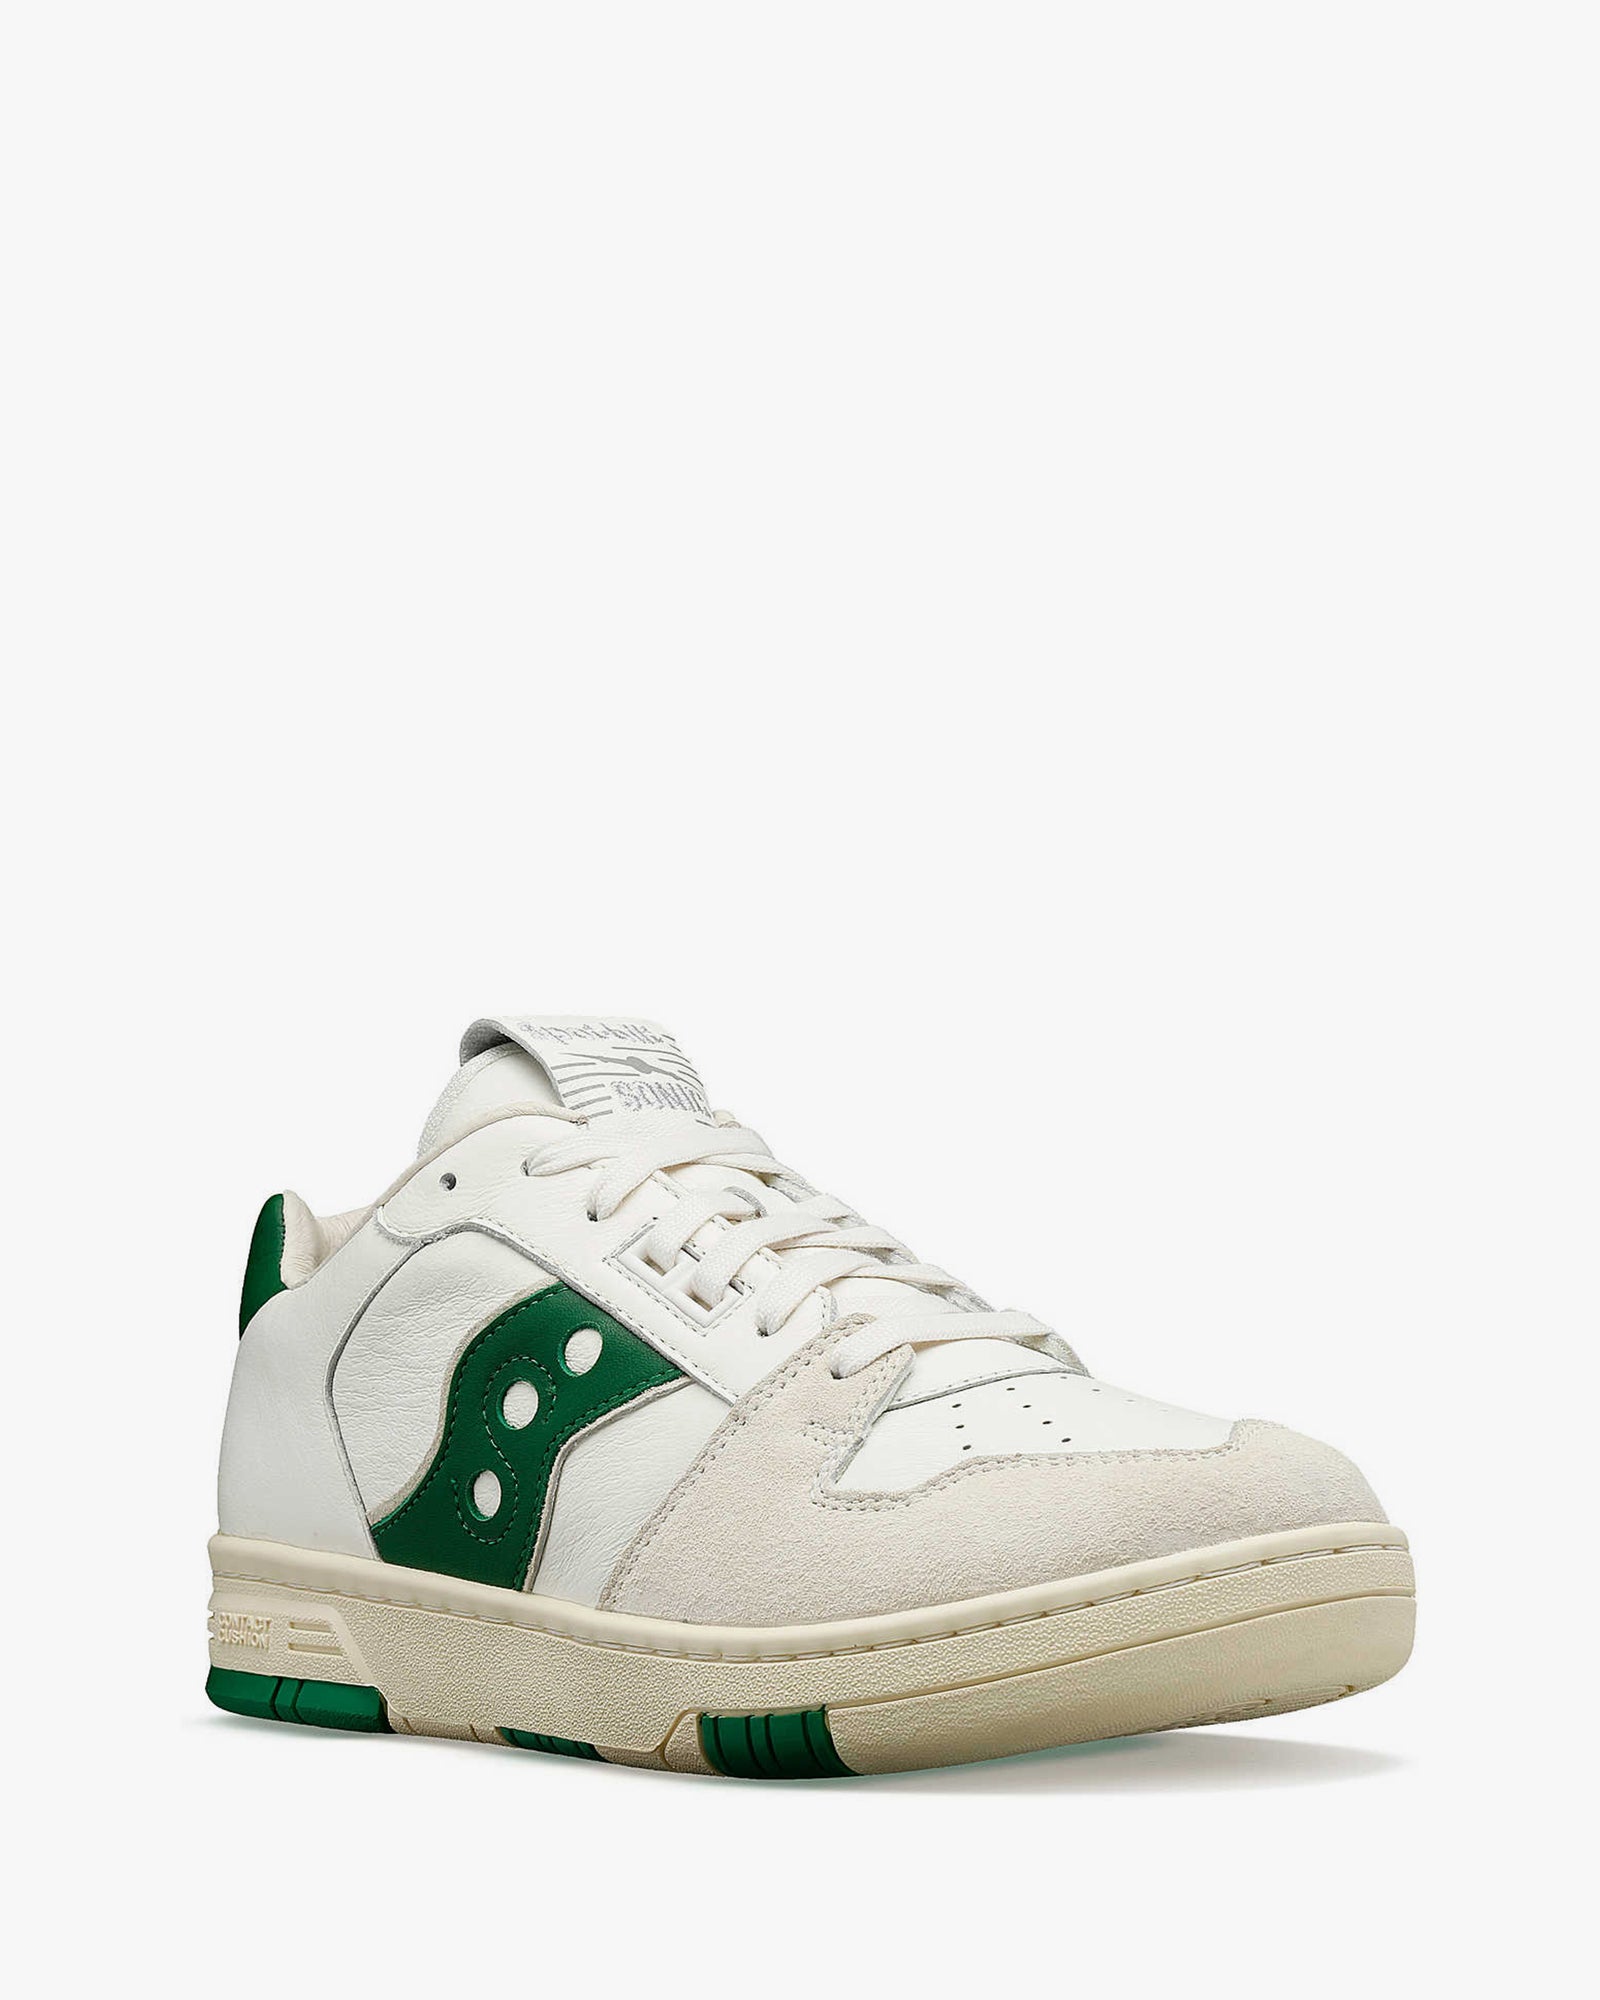 front view of the Saucony Sonic Low Sneakers in Green and Beige